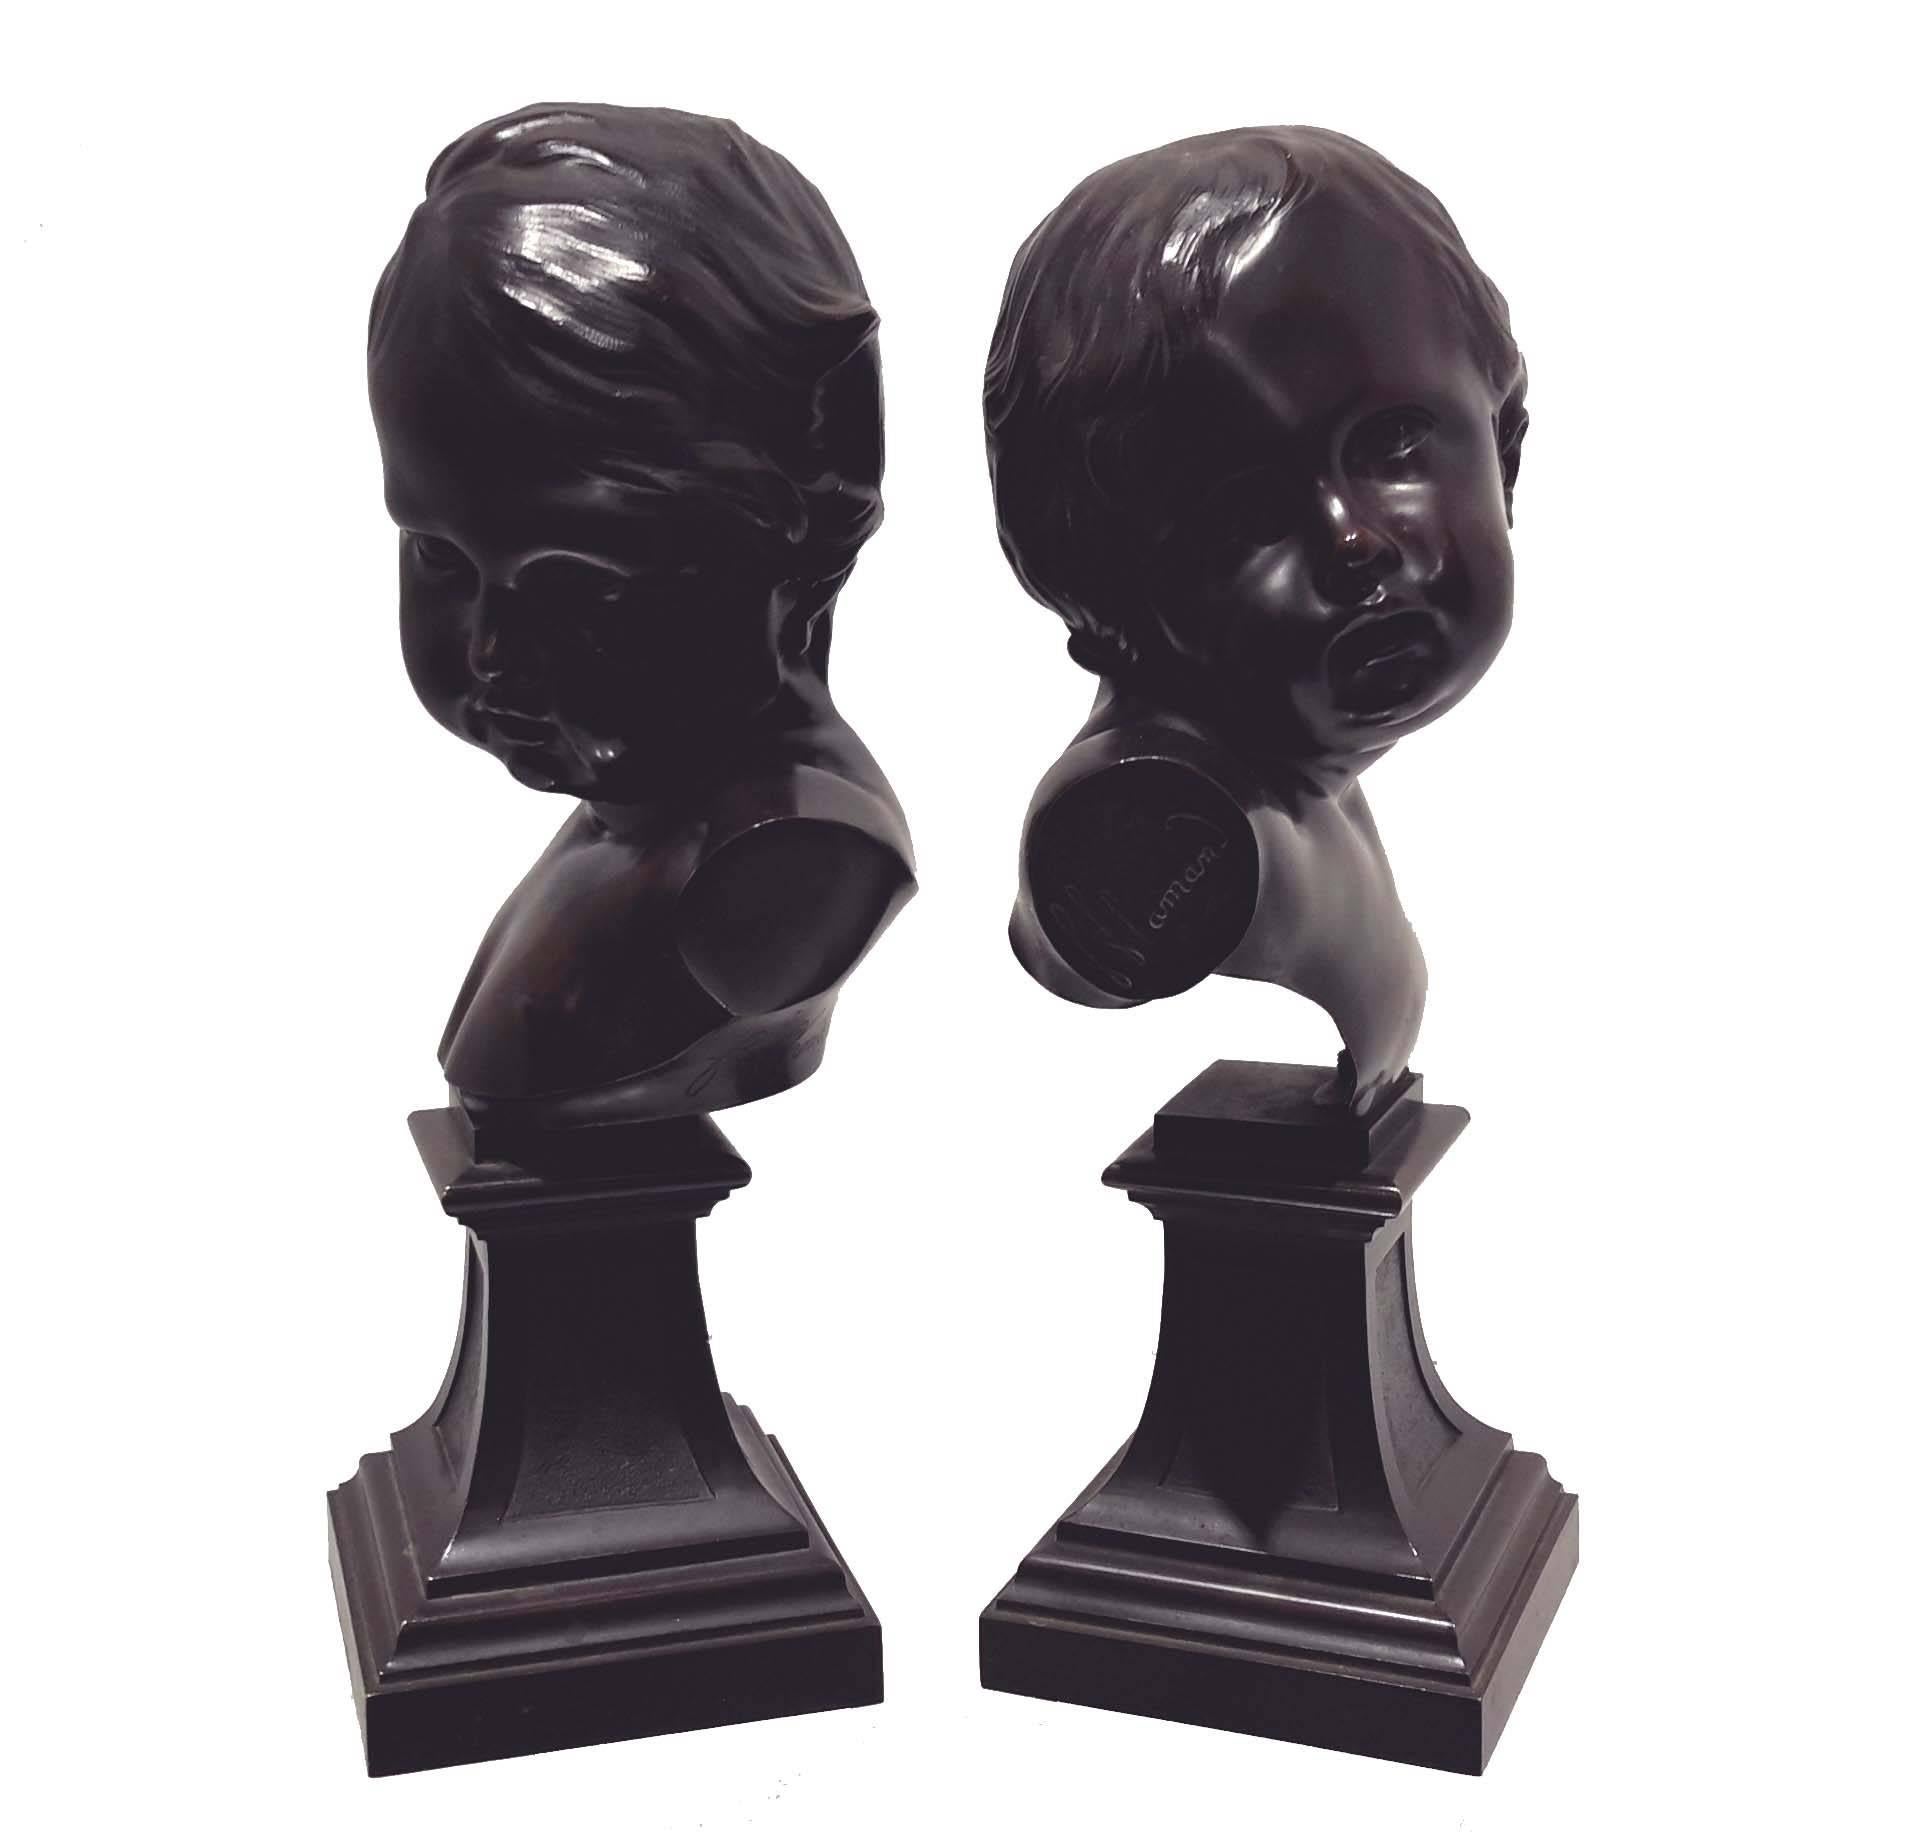 After Francois Duquesnoy (Flemish 1594-1643): A pair of French 19th century bronze busts of young boys, each inscribed 'f. flamand' on bronze pedestal.